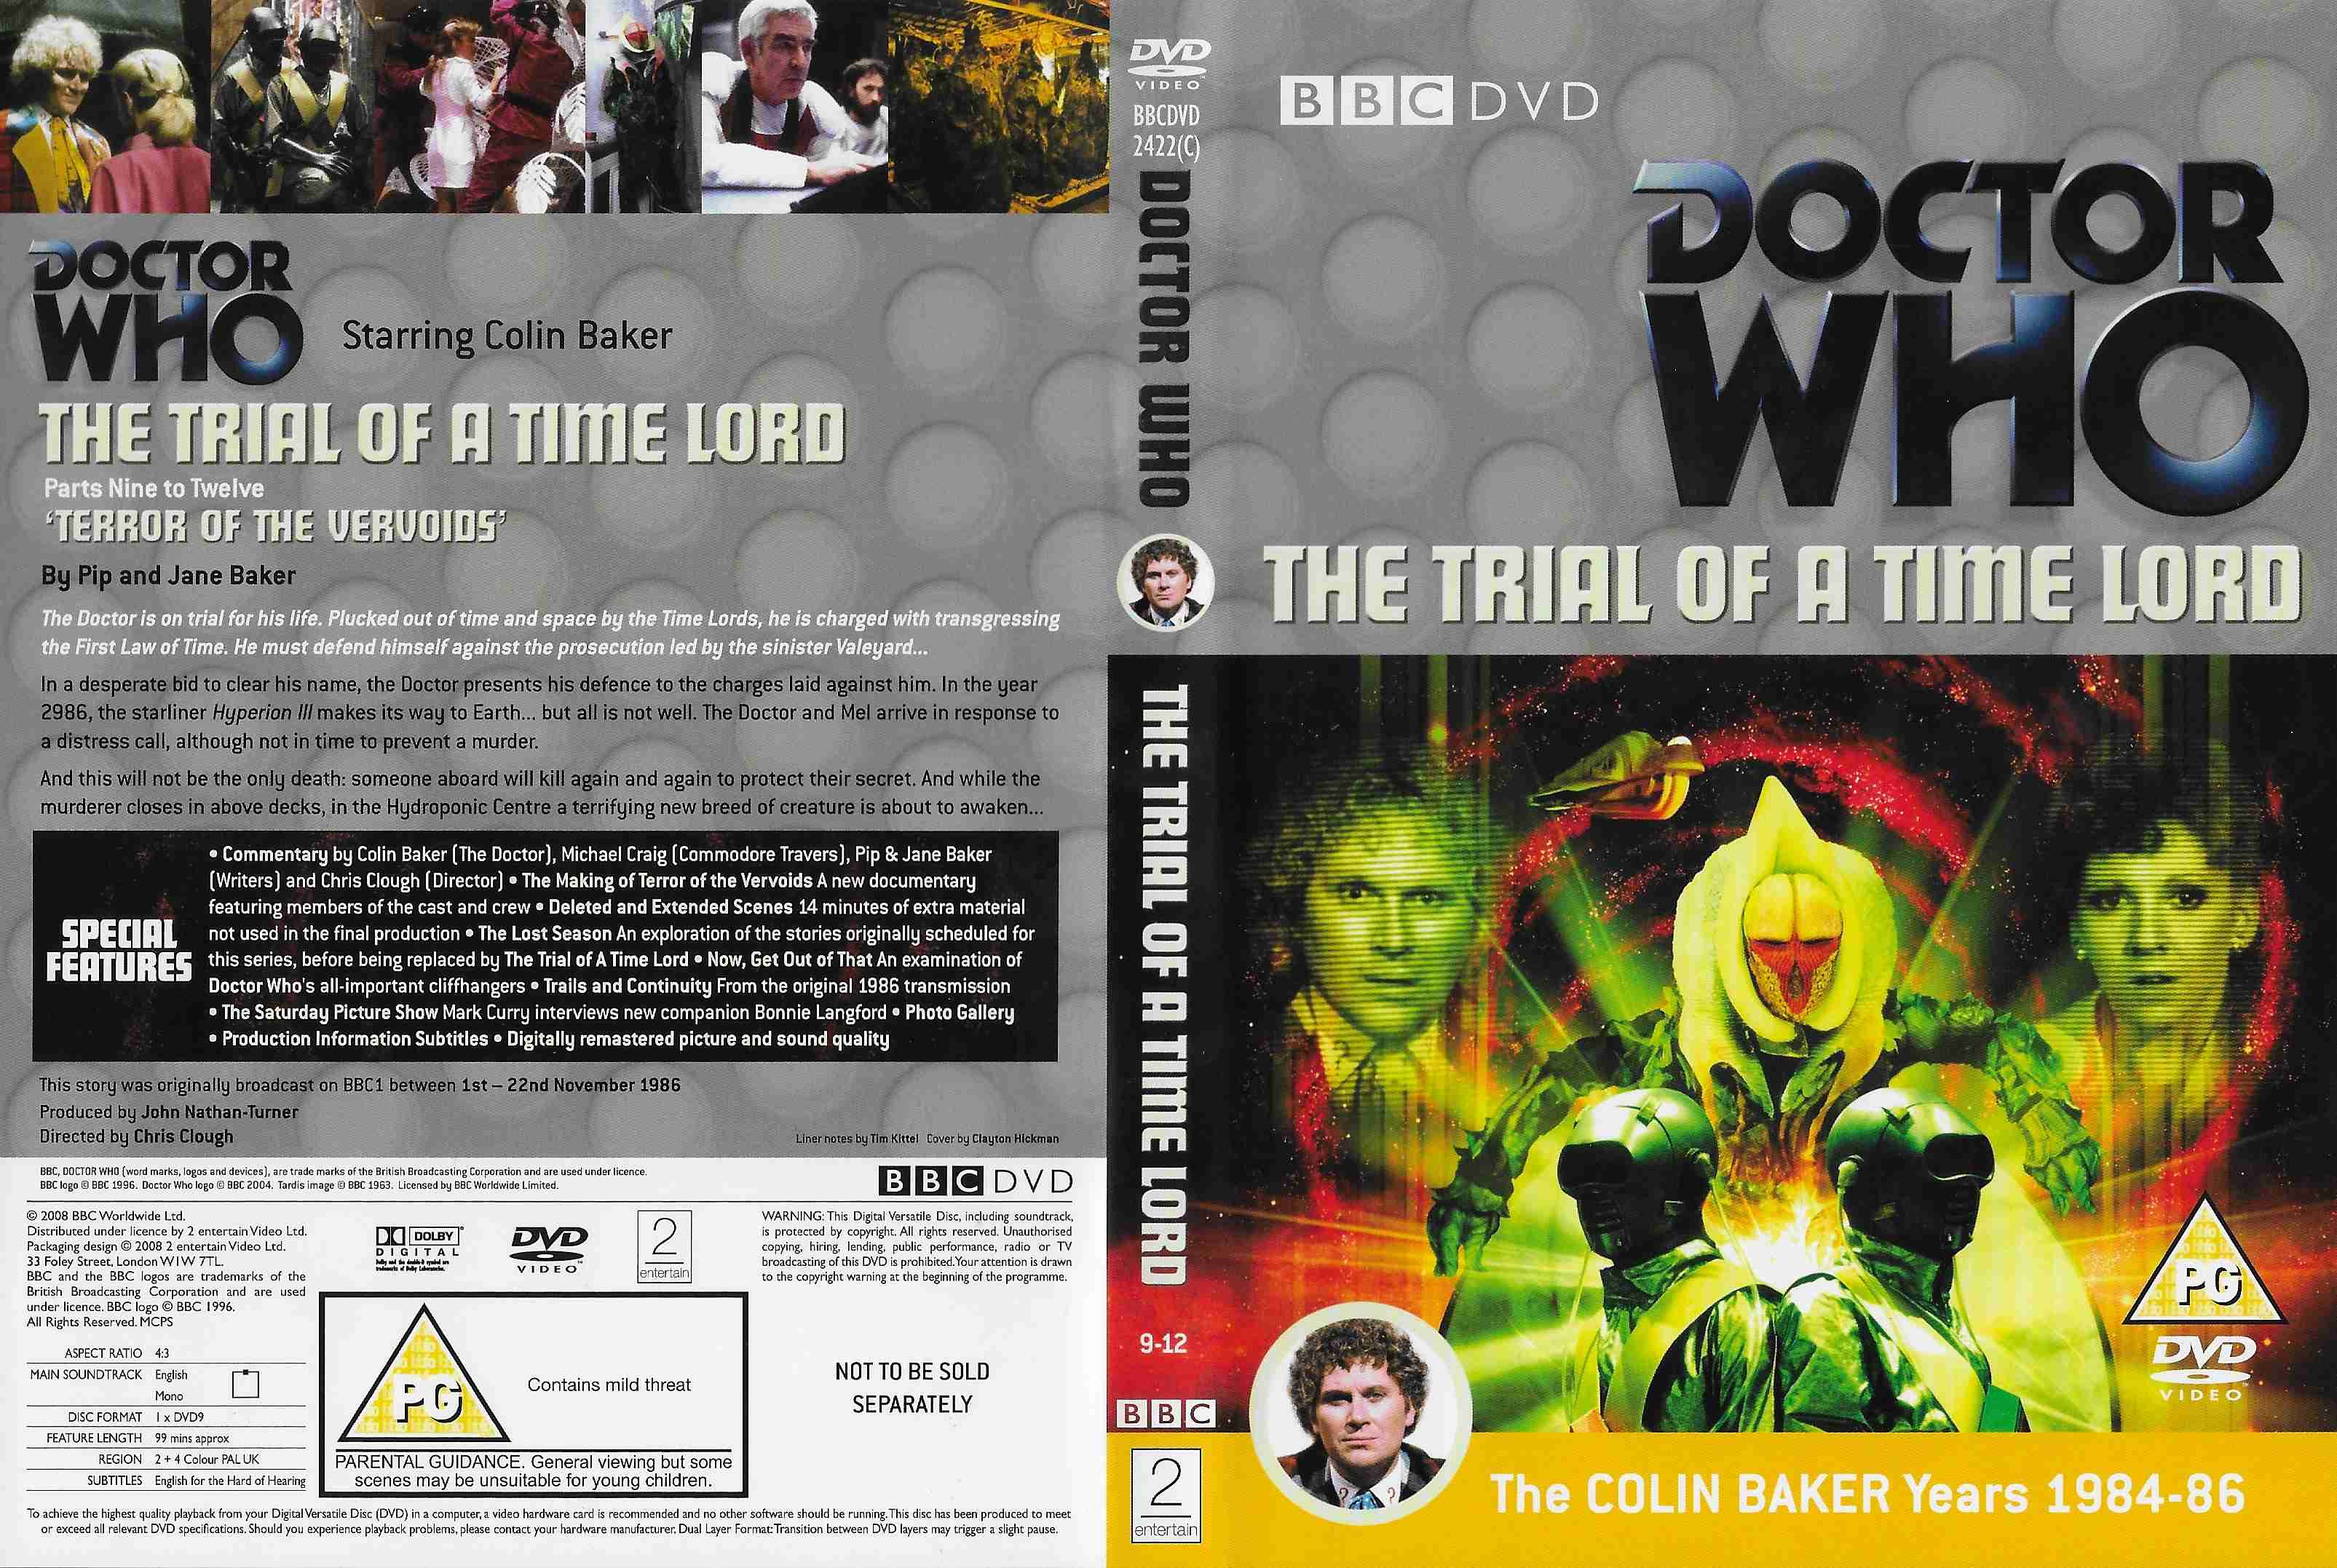 Picture of BBCDVD 2422C Doctor Who - The trial of a Time Lord - Parts 9-12 - Terror Of The Vervoids by artist Pip and Jane Baker from the BBC records and Tapes library